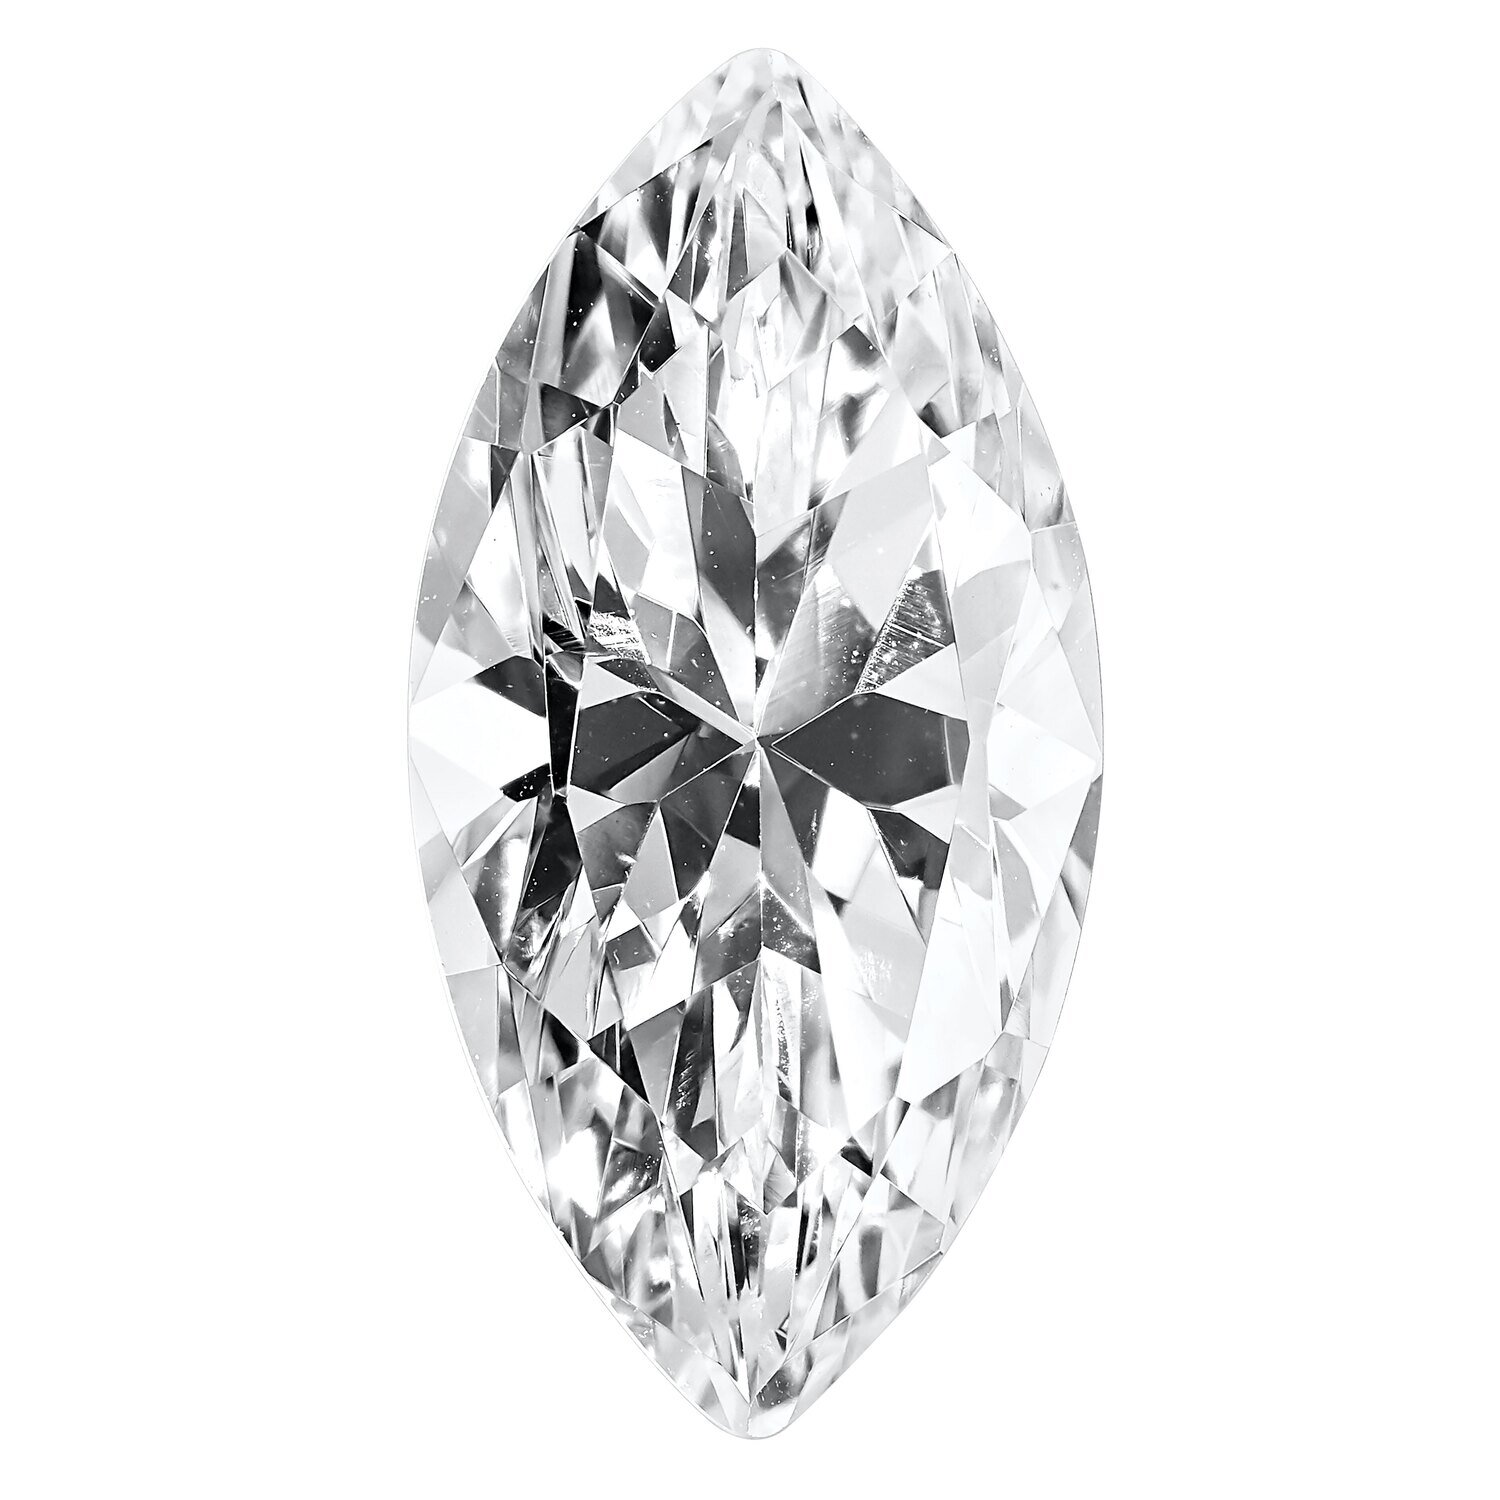 Cubic Zirconia White 12X6mm Marquise A Quality Gemstone CZ-1206-MQF-WH-A